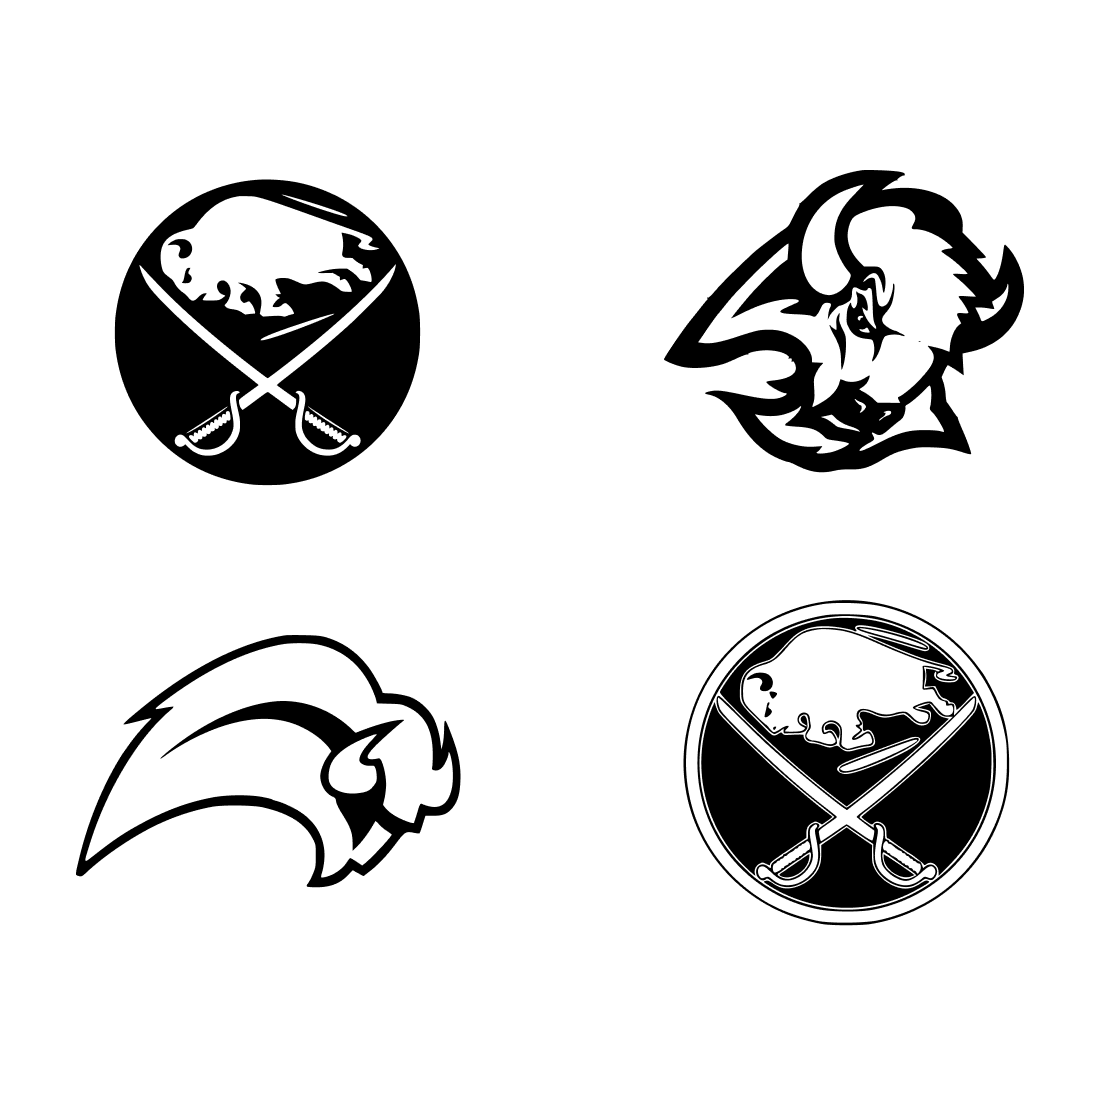 Four different logos of different sports teams.